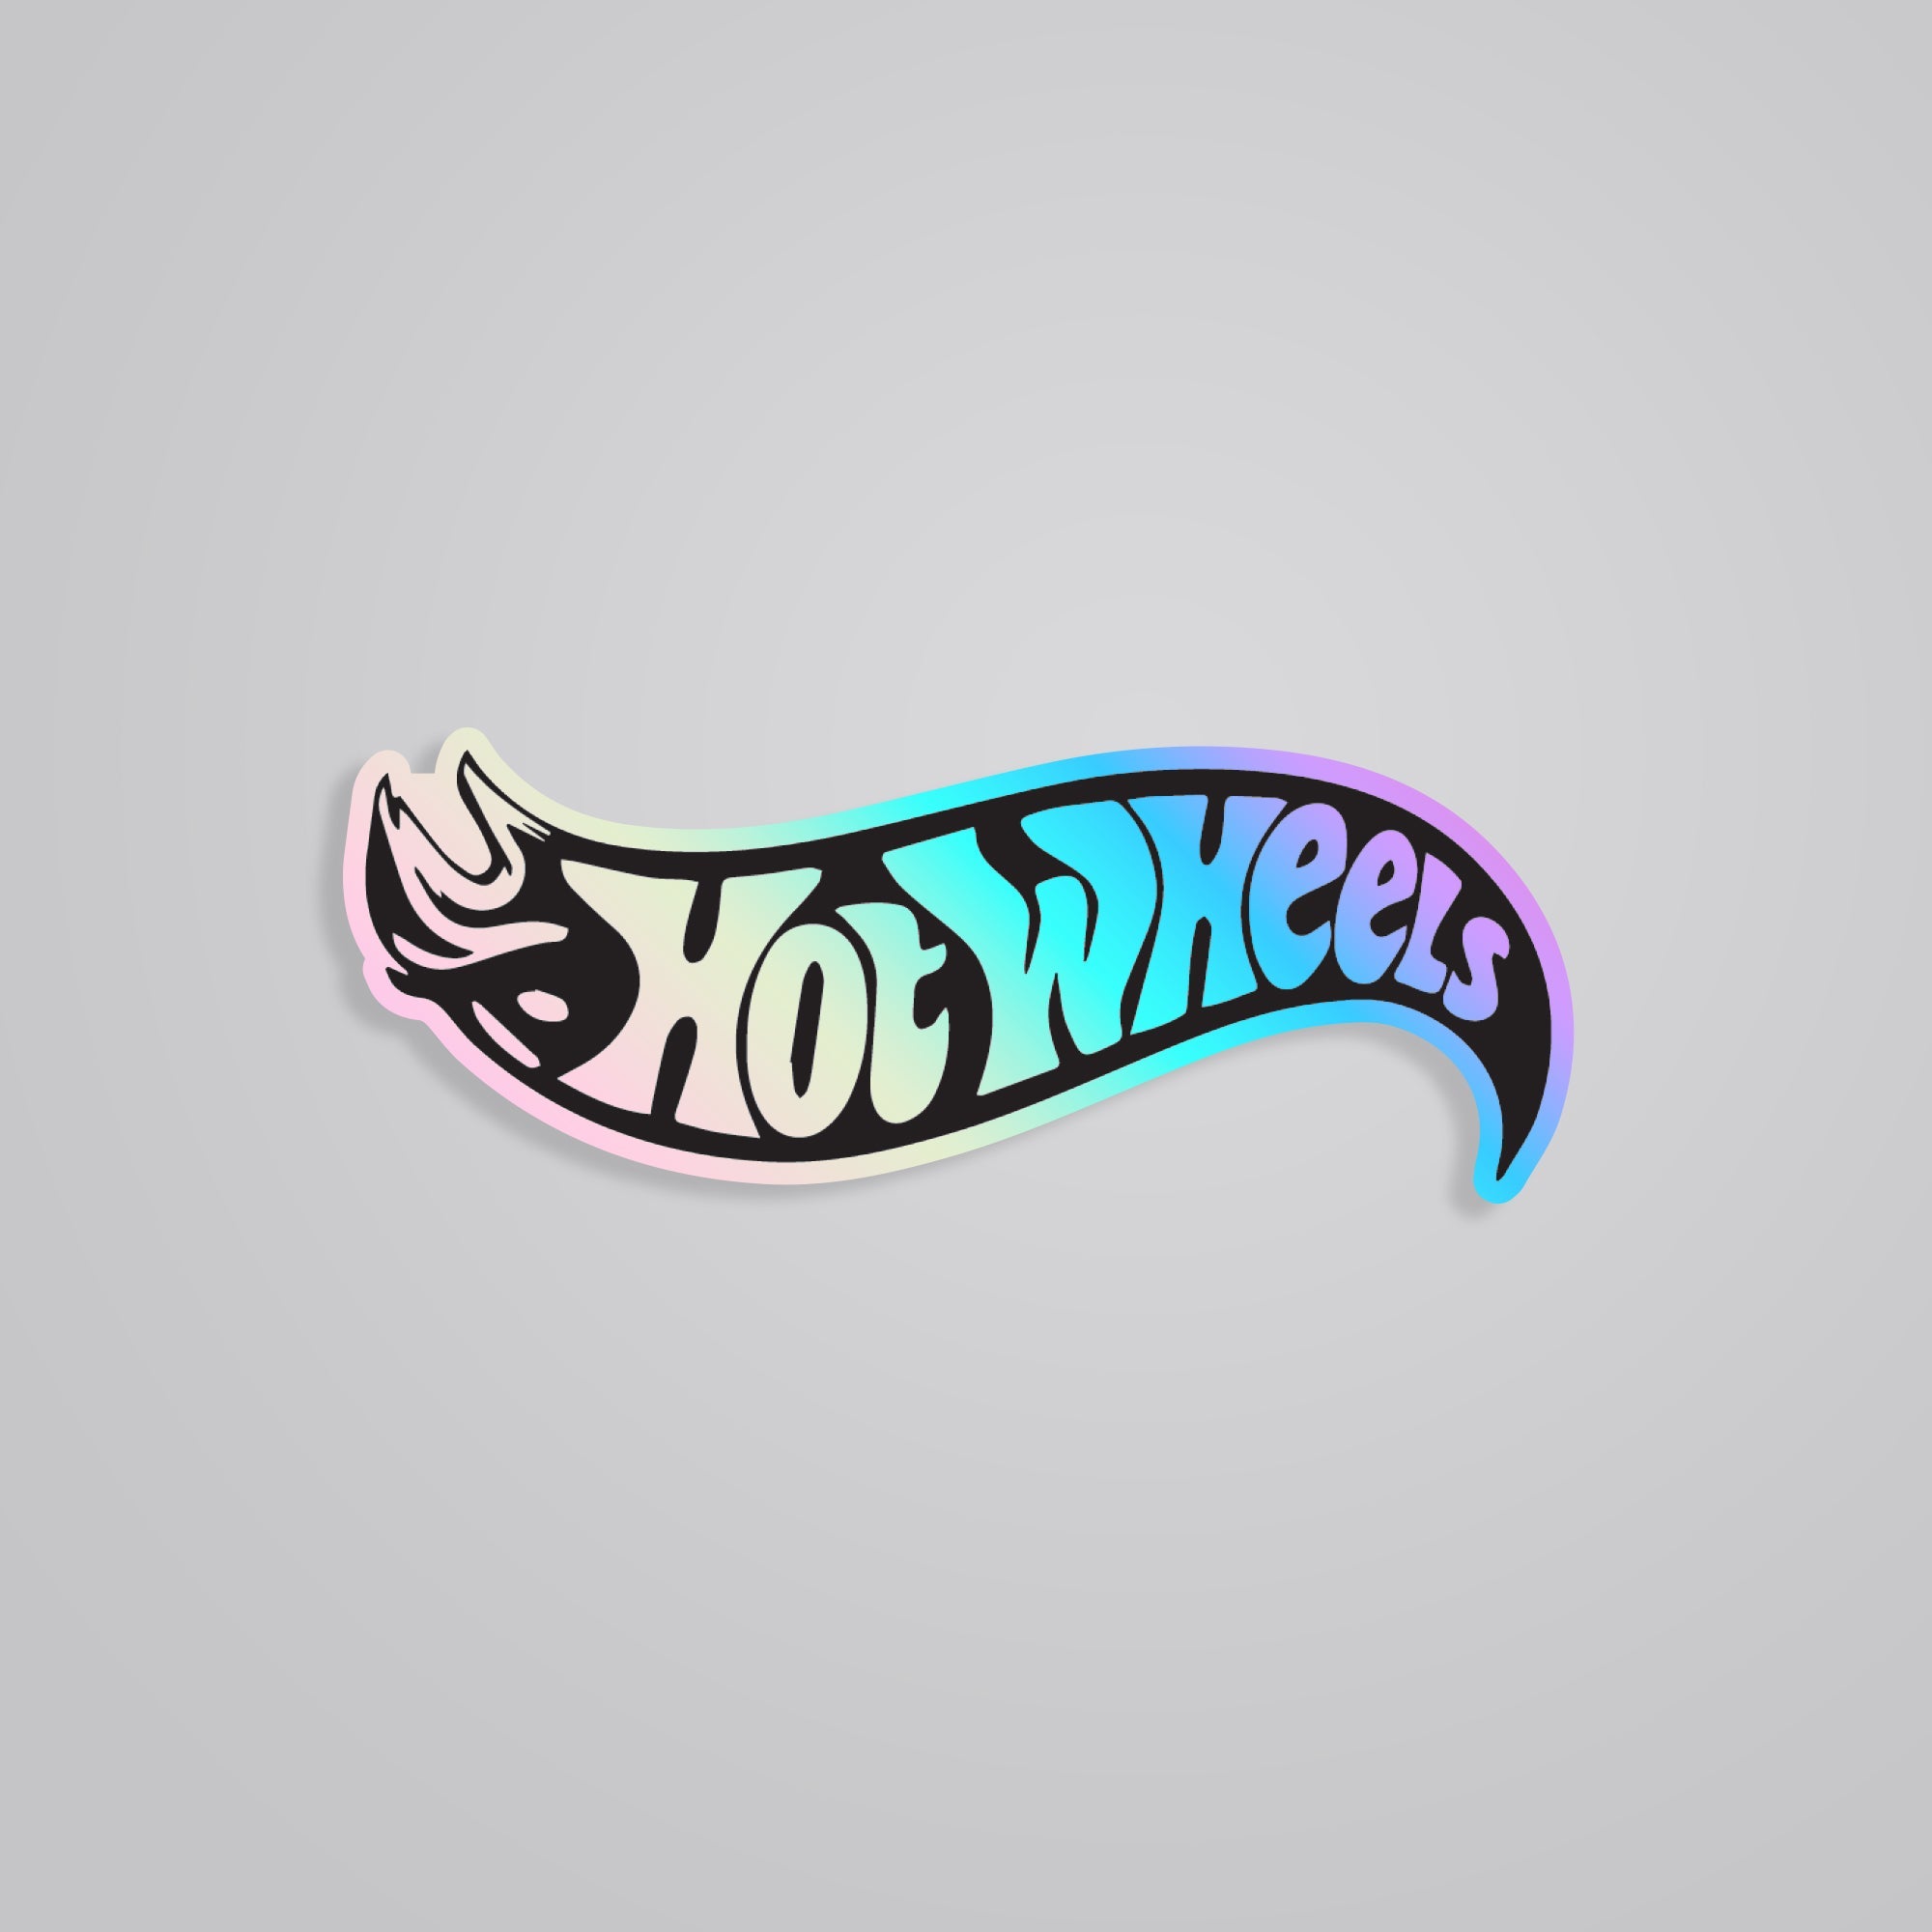 Fomo Store Holographic Stickers Cars & Bikes Hot Wheels